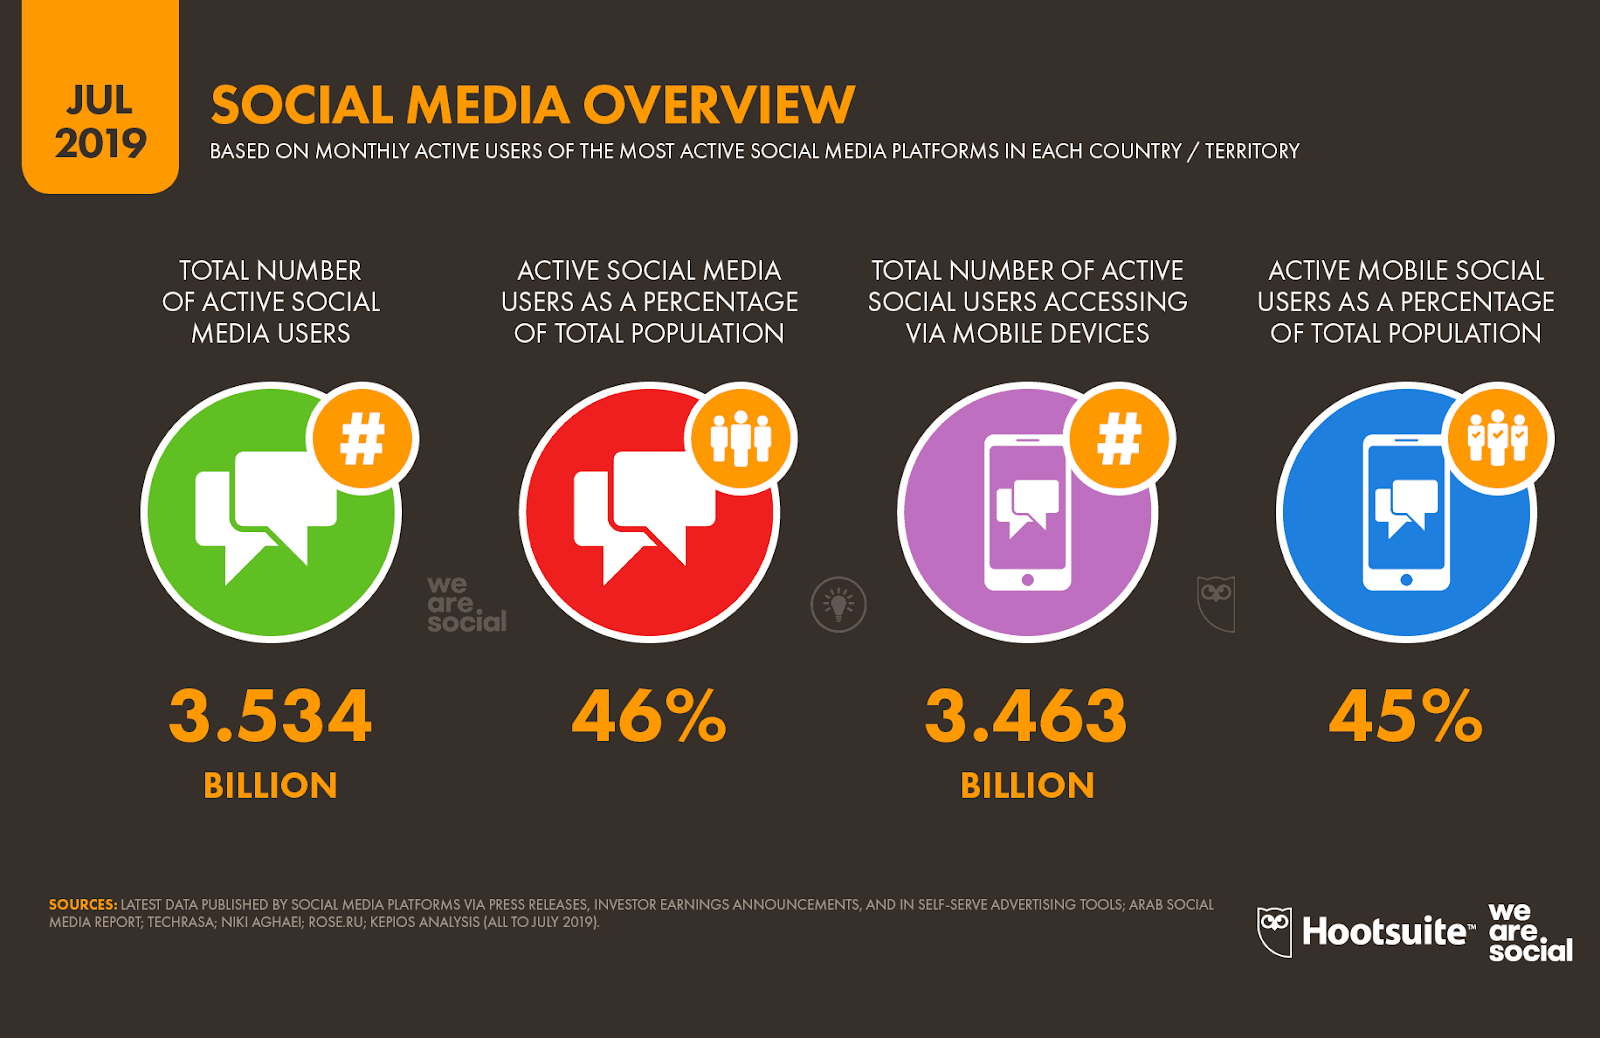  3.5 billion people actively use social media platforms every month, globally